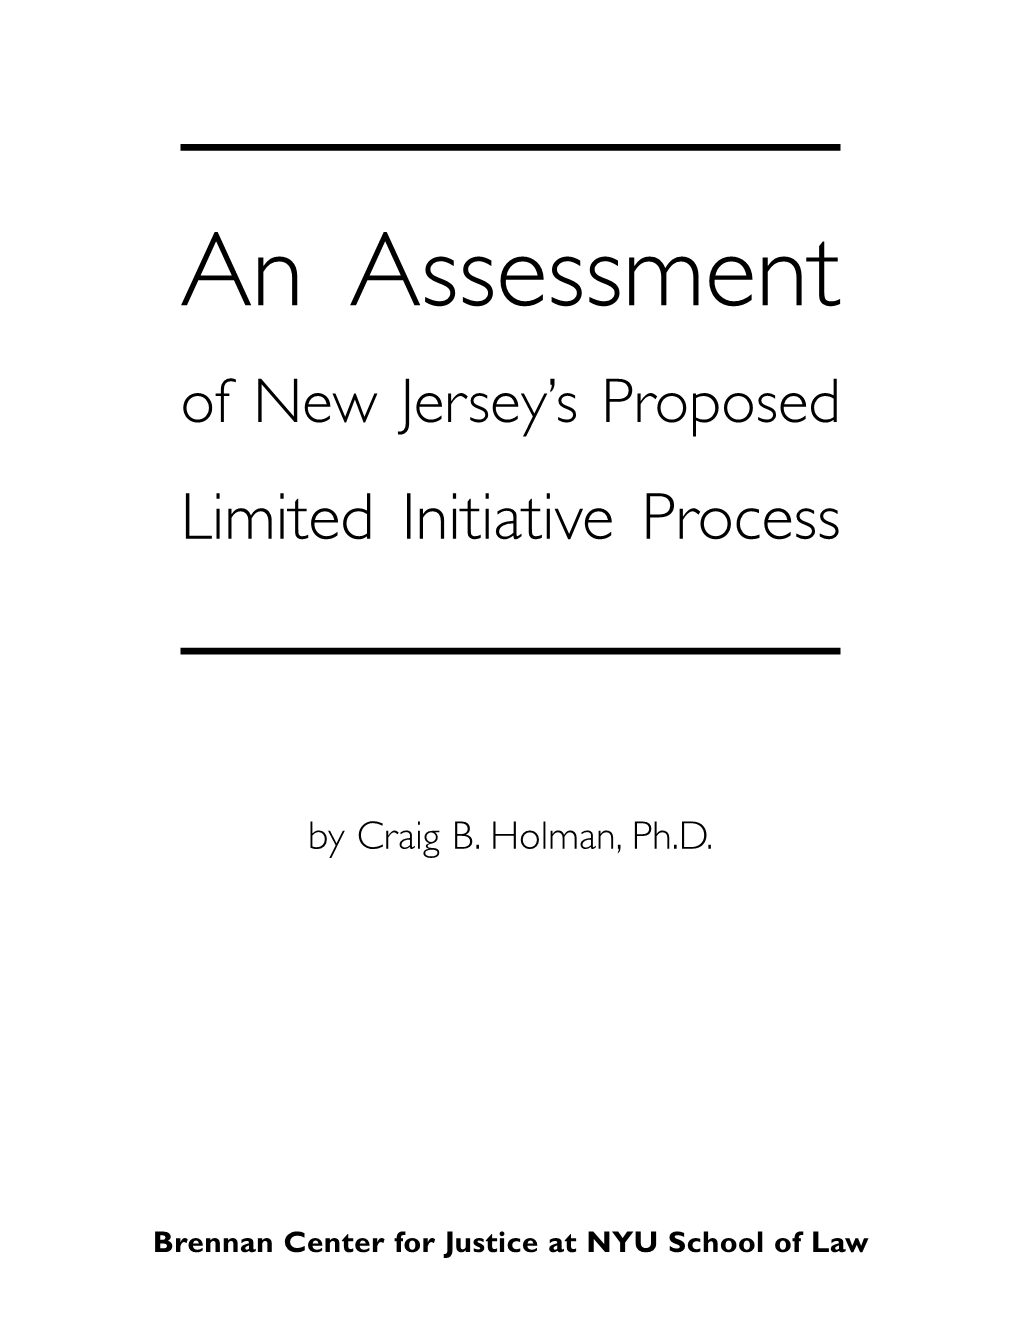 An Assessment of New Jersey’S Proposed Limited Initiative Process